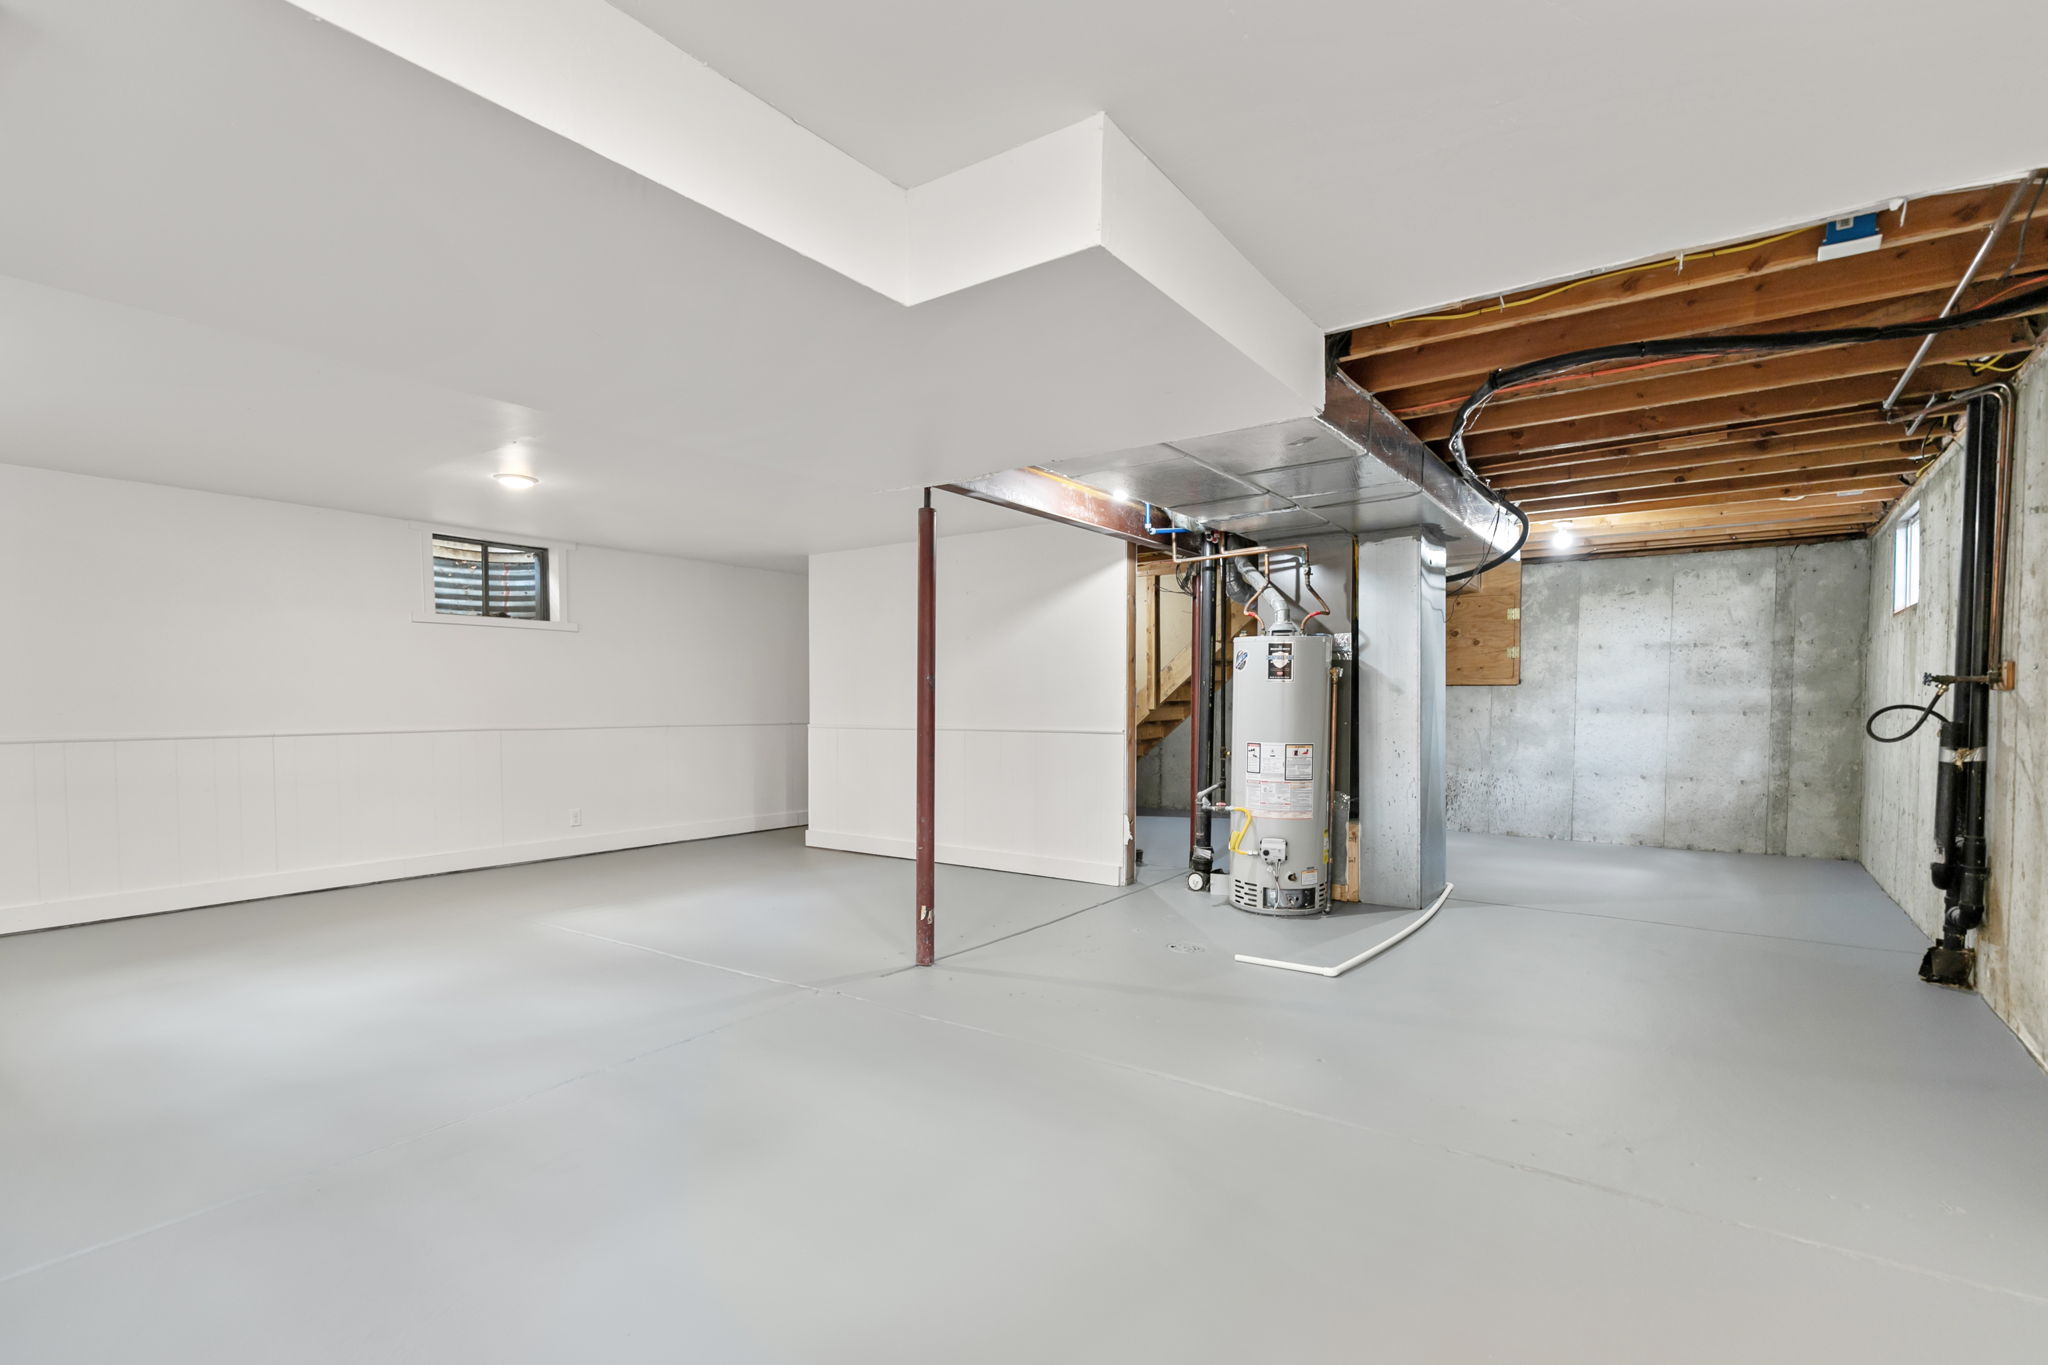 Unfinished basement offers future possibilities